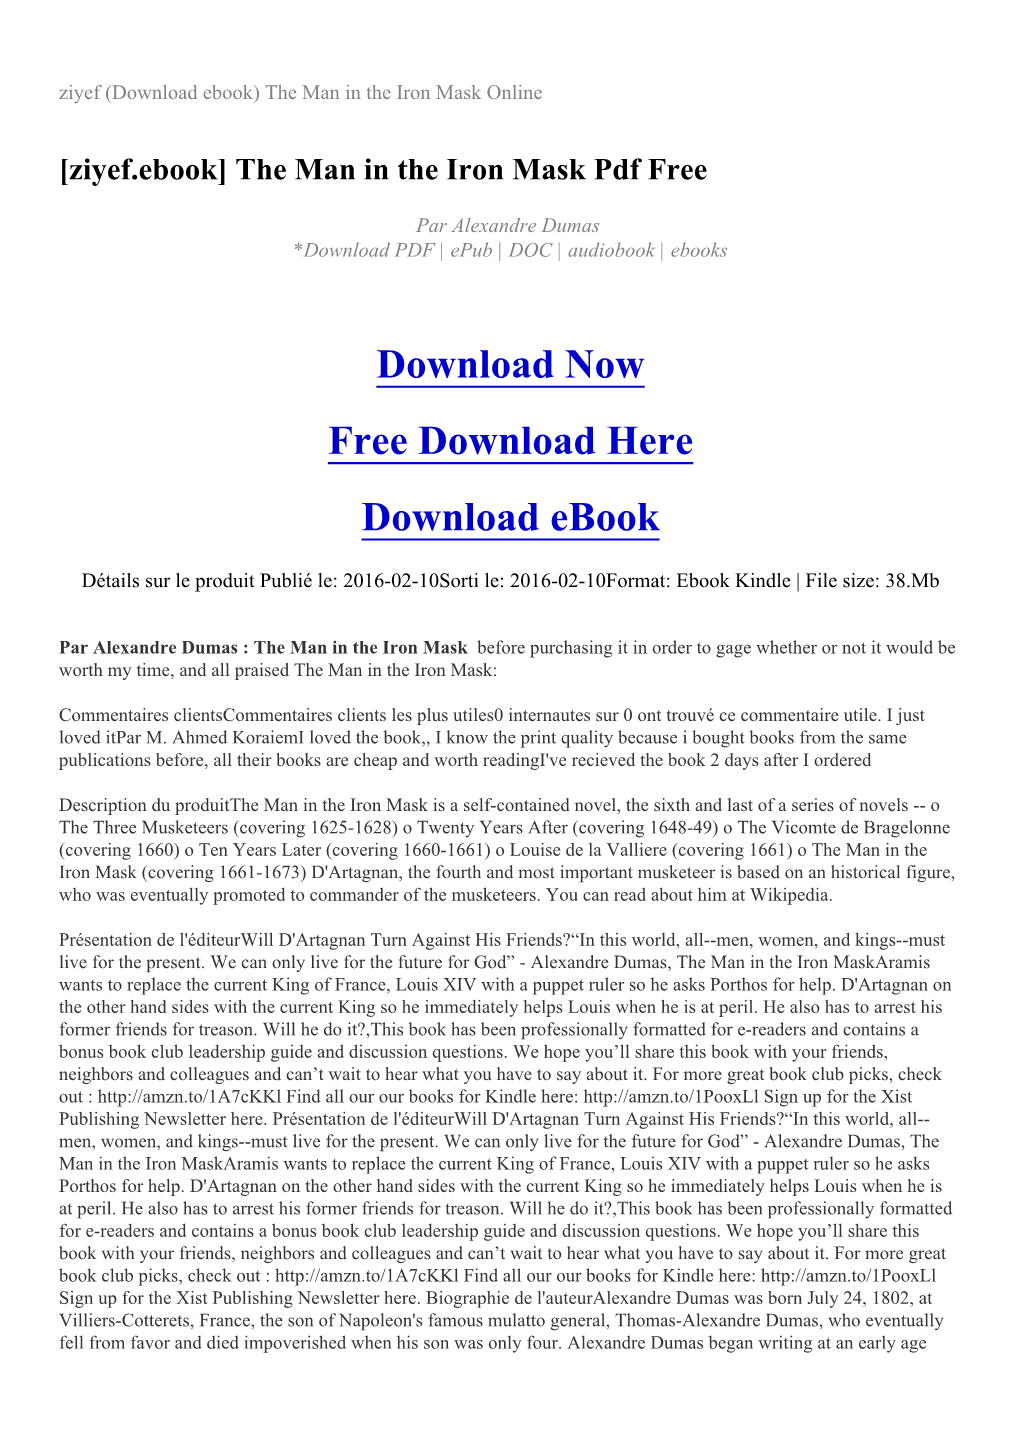 Ziyef (Download Ebook) the Man in the Iron Mask Online